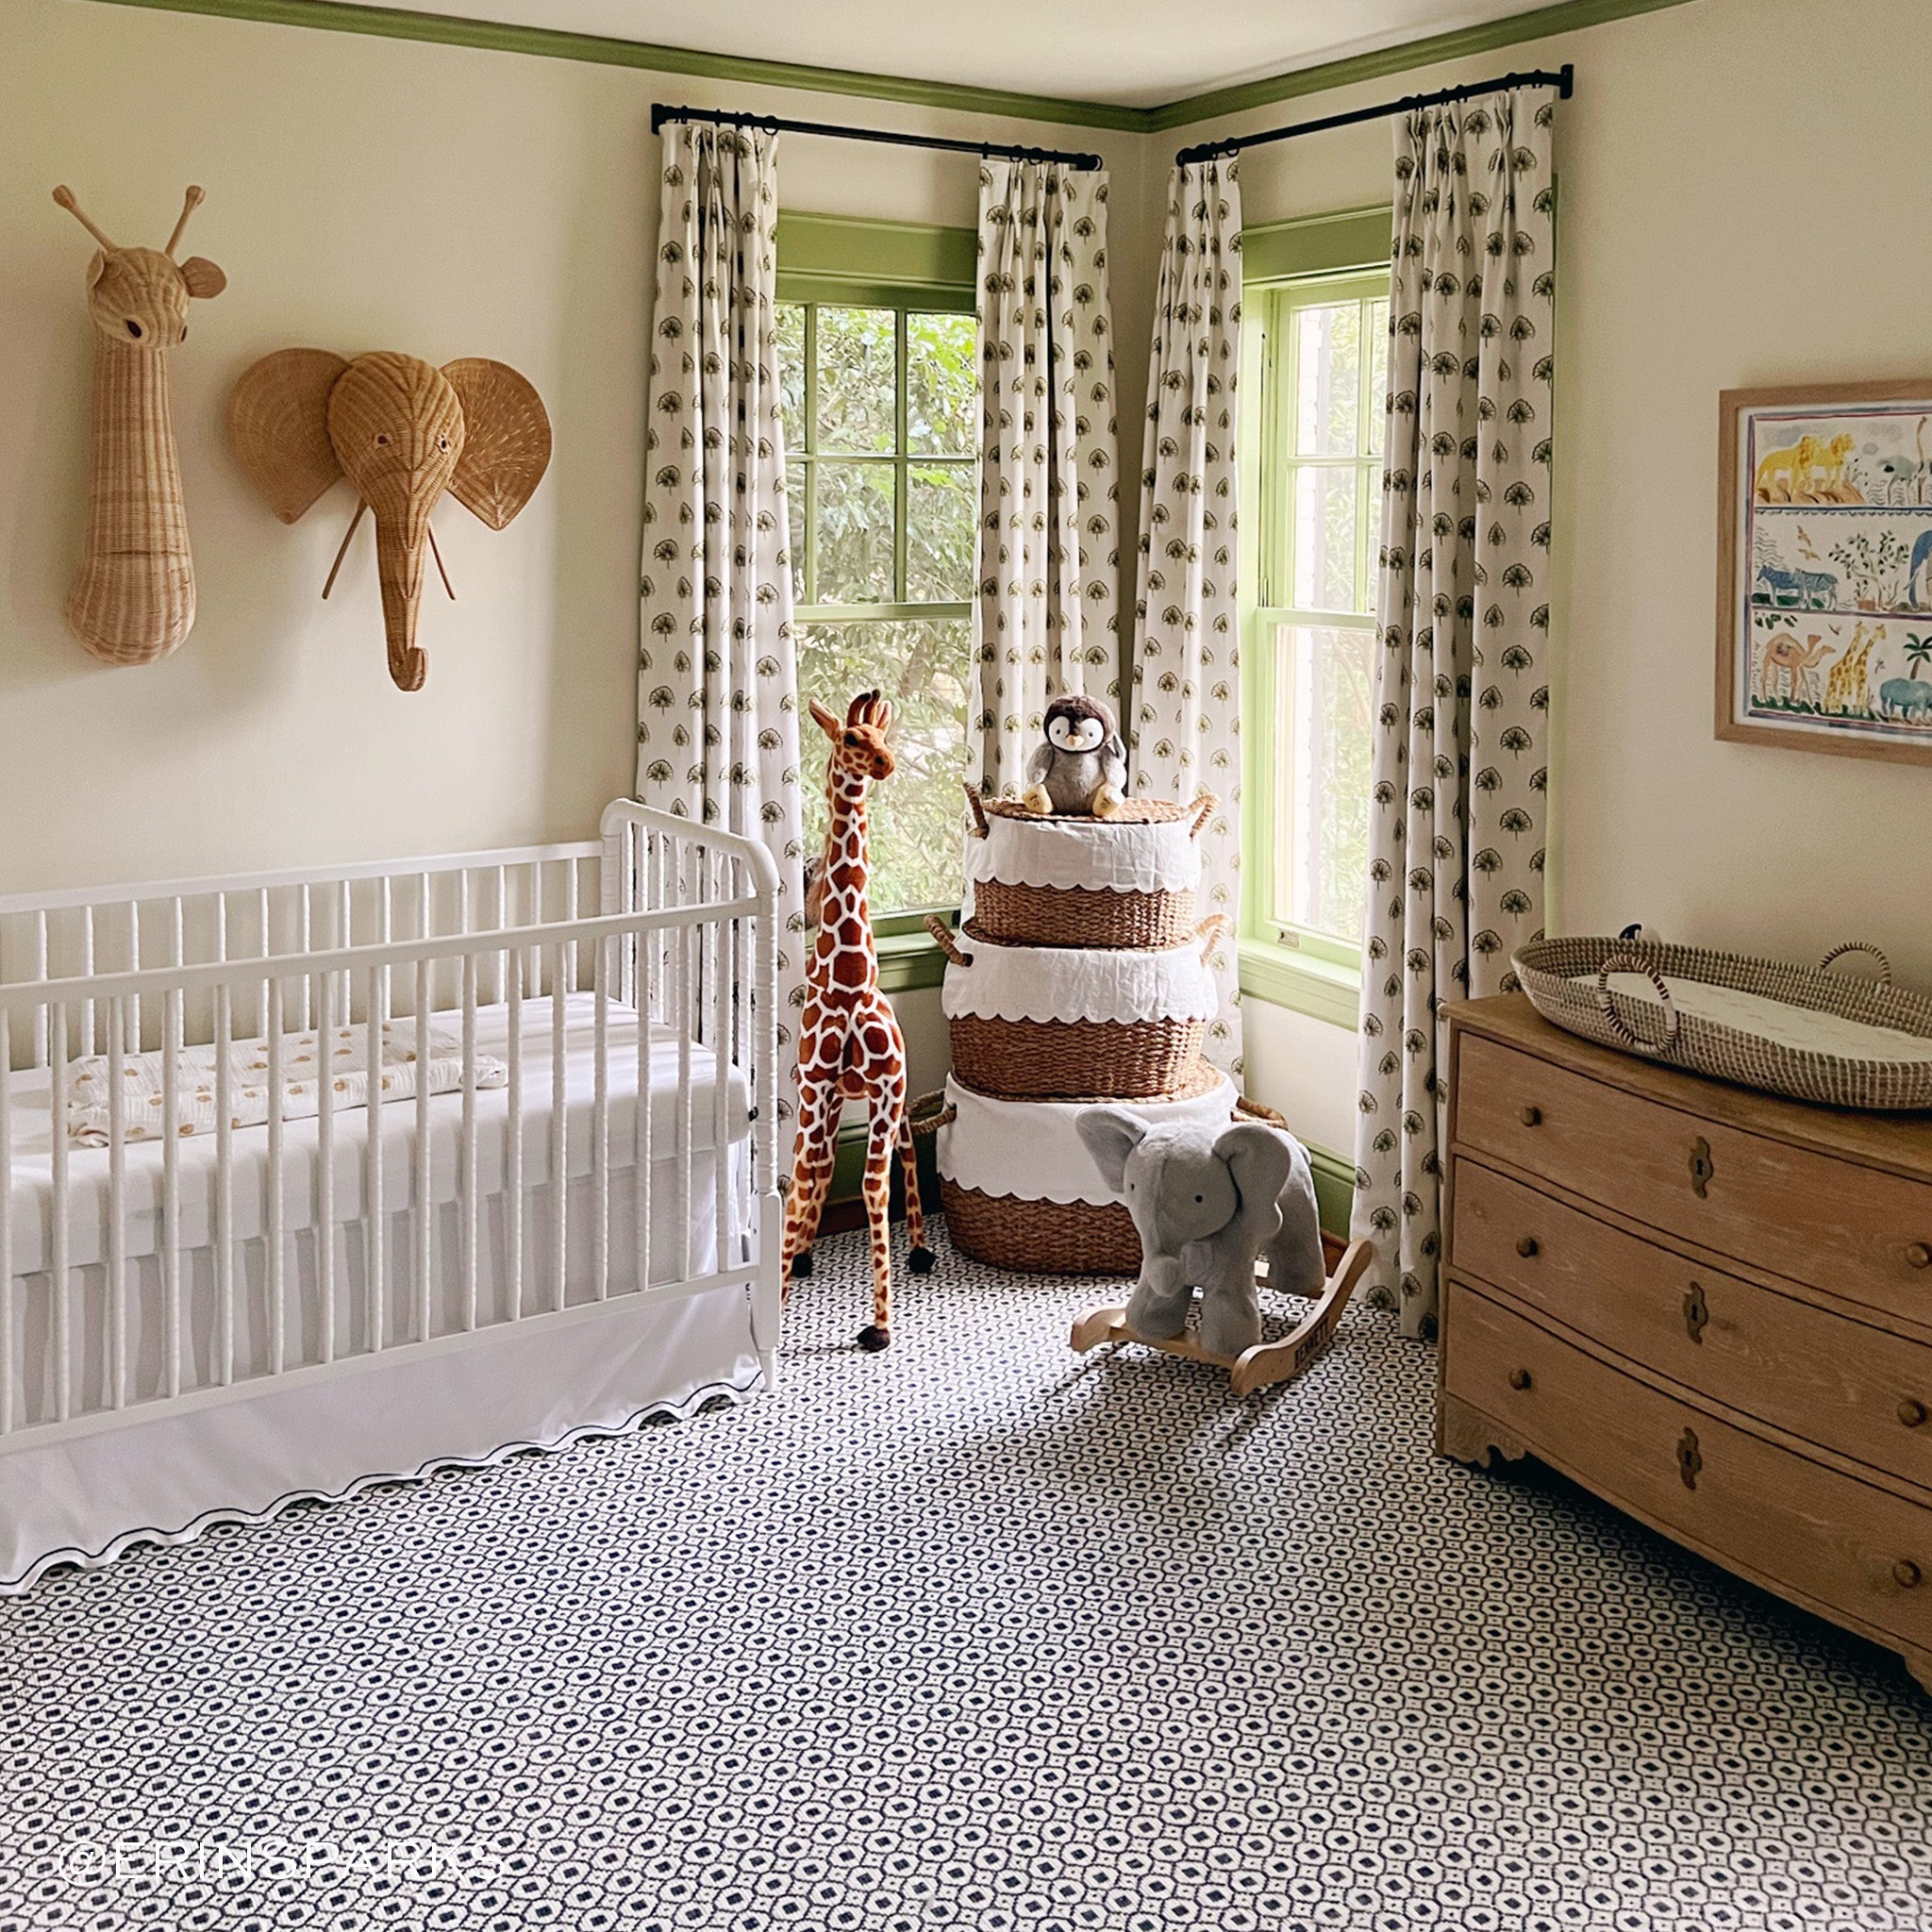 Nursery room styled with Green Floral Printed Curtains next to white crib and wooden dresser. Photo taken by Erin Spark